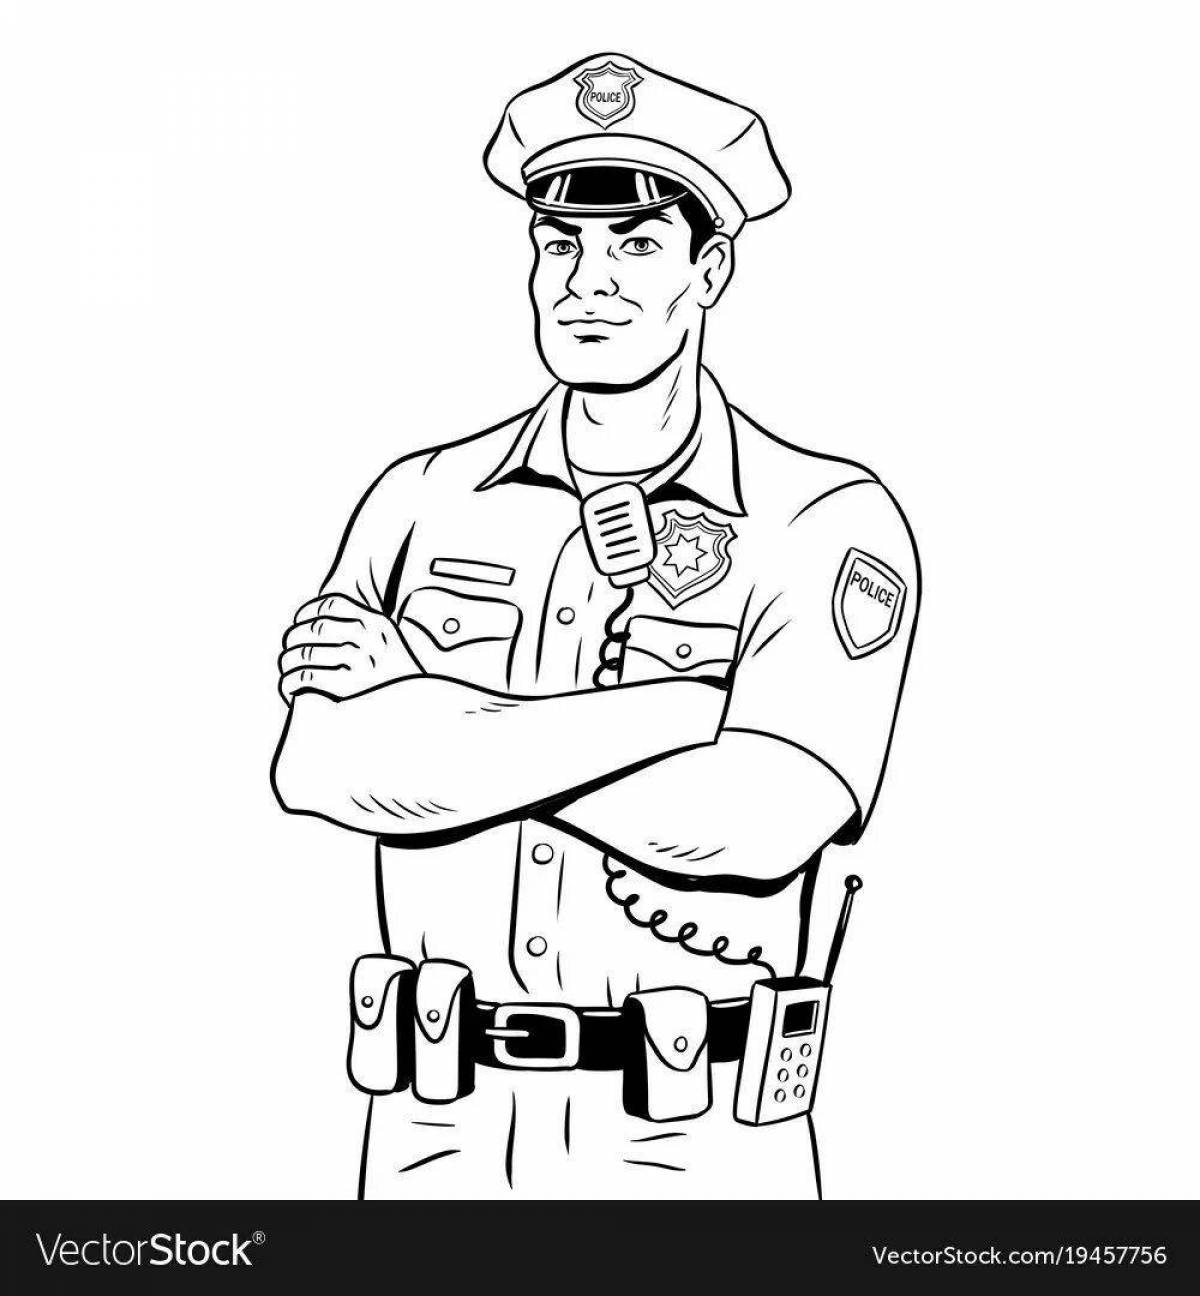 Coloring book amazing police profession